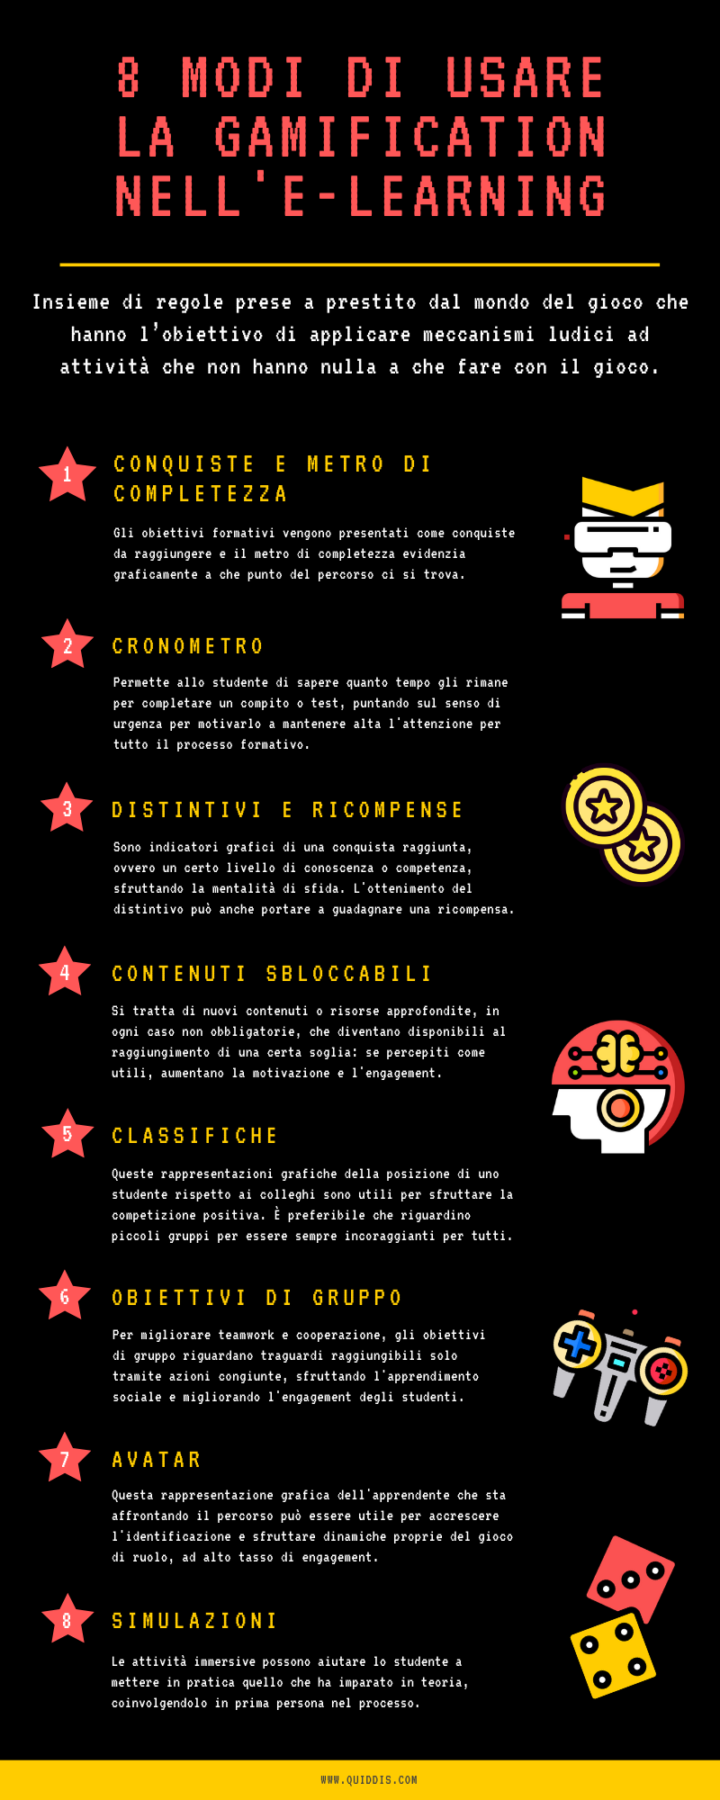 Gamification e-learning